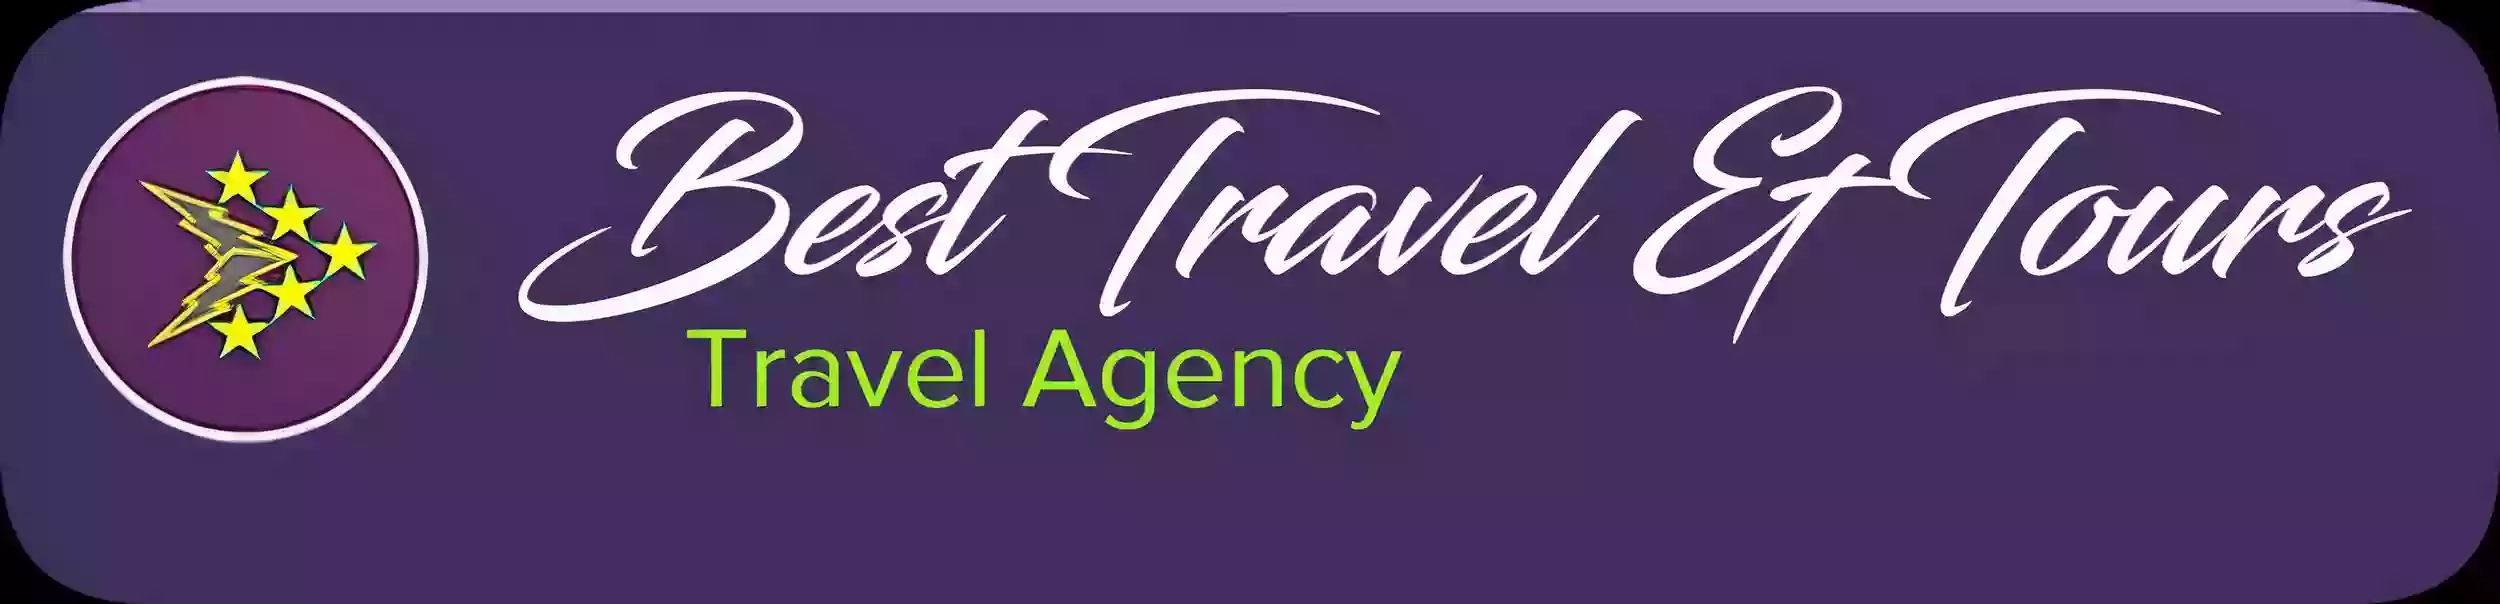 Best Travel and Tours